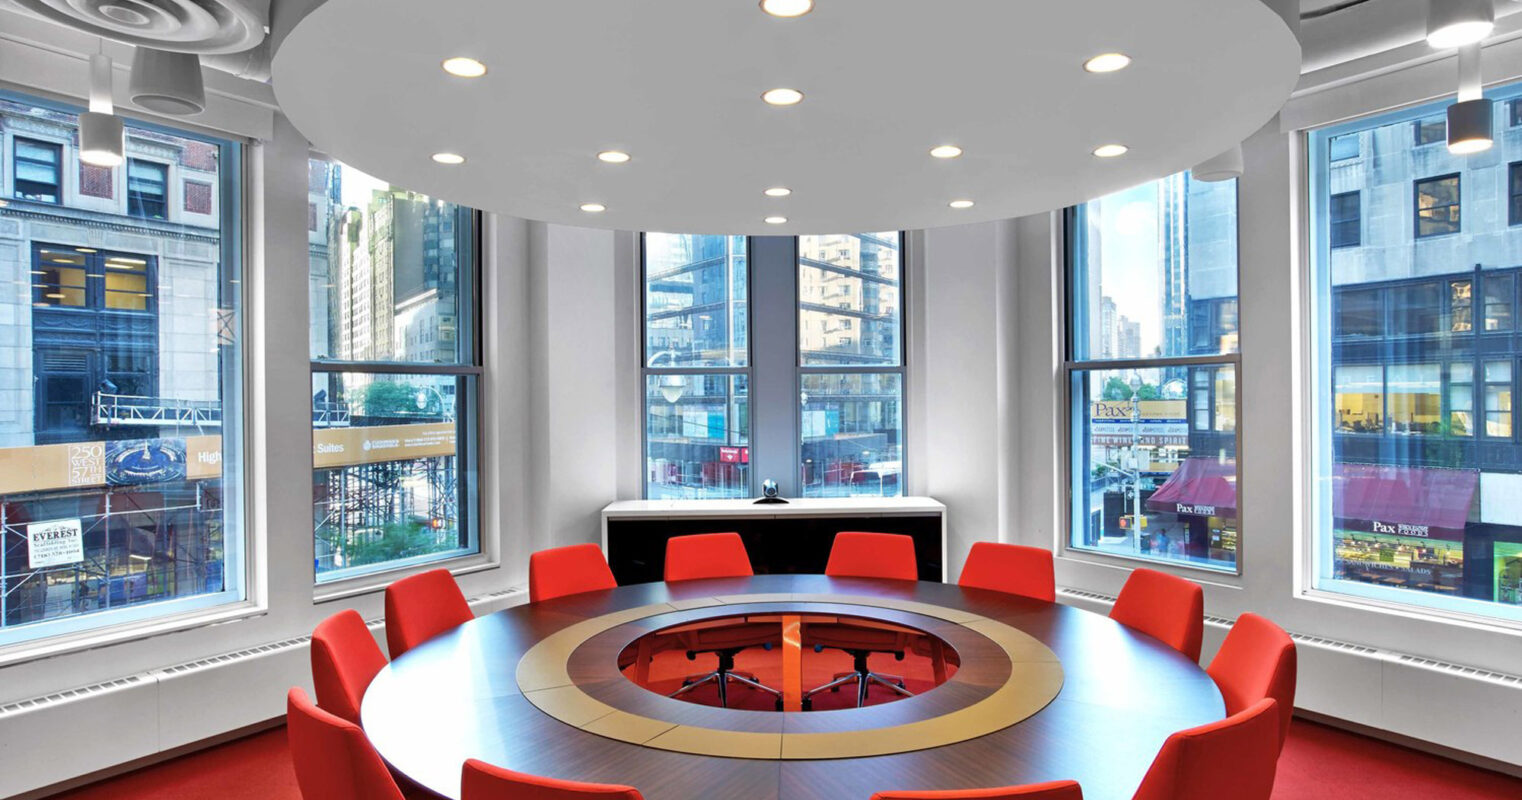 Bright conference room with large circular table surrounded by red chairs, a circular white pendant light above, and floor-to-ceiling windows offering a city view. The interior showcases a modern design with a vibrant color contrast.